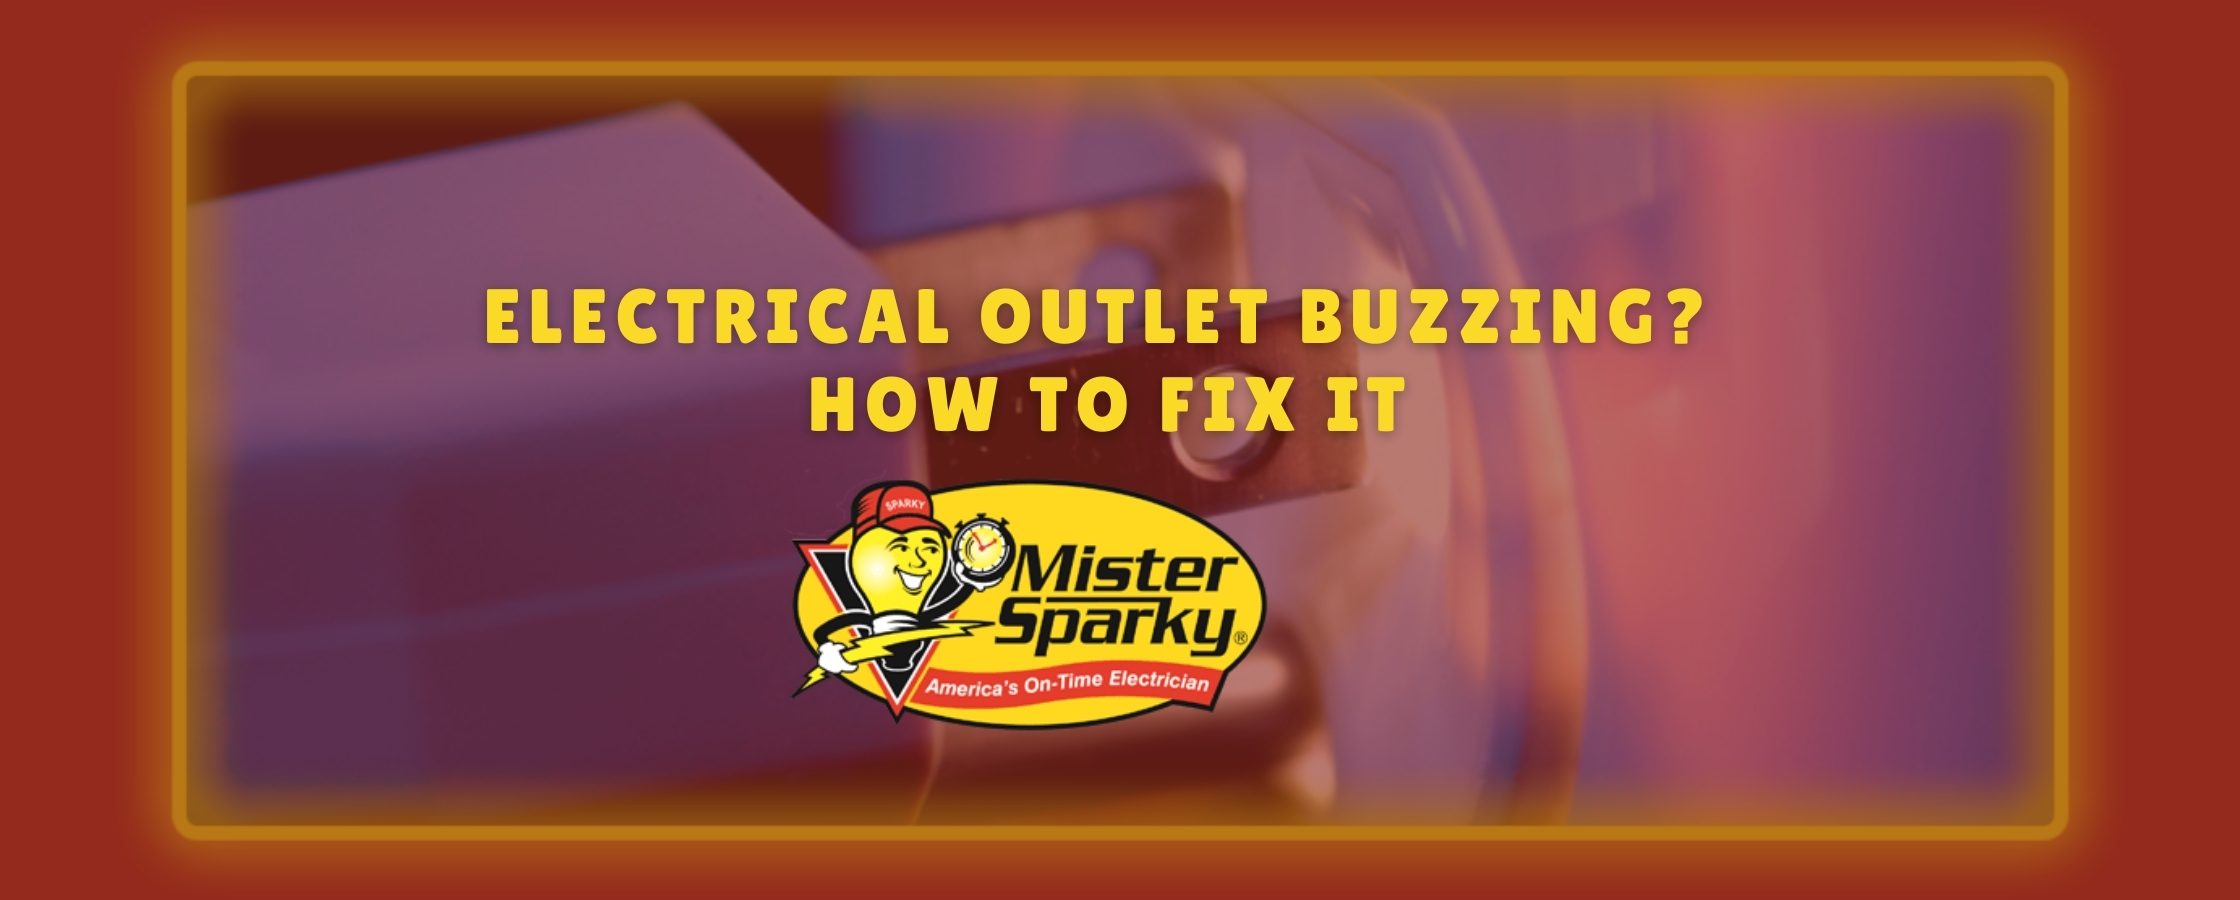 electrical outlet buzzing how to fix it tulsa